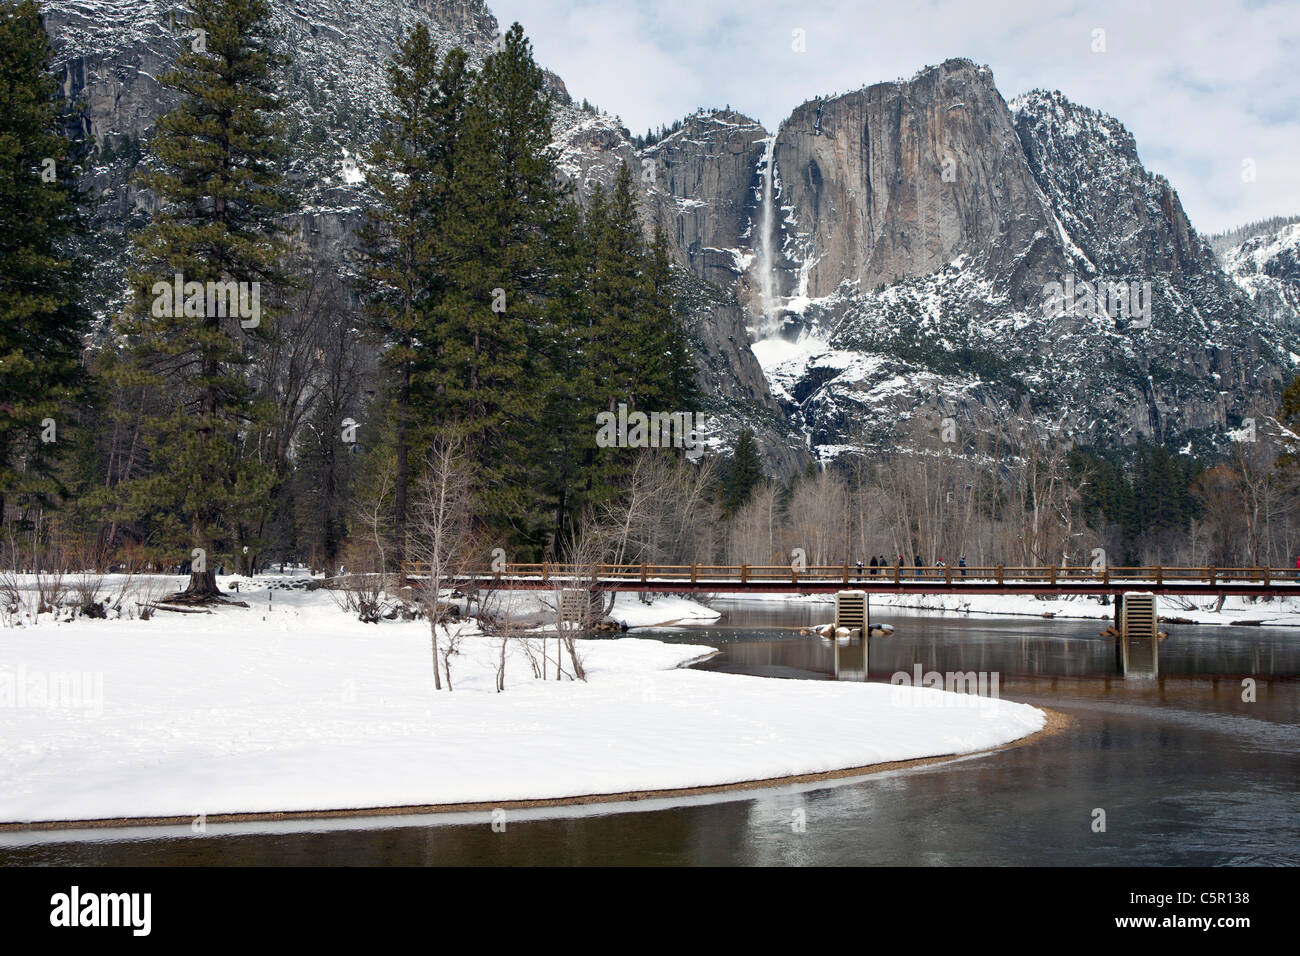 Merced River with Yosemite Falls in the background during winter, Yosemite National Park, California, United States of America Stock Photo